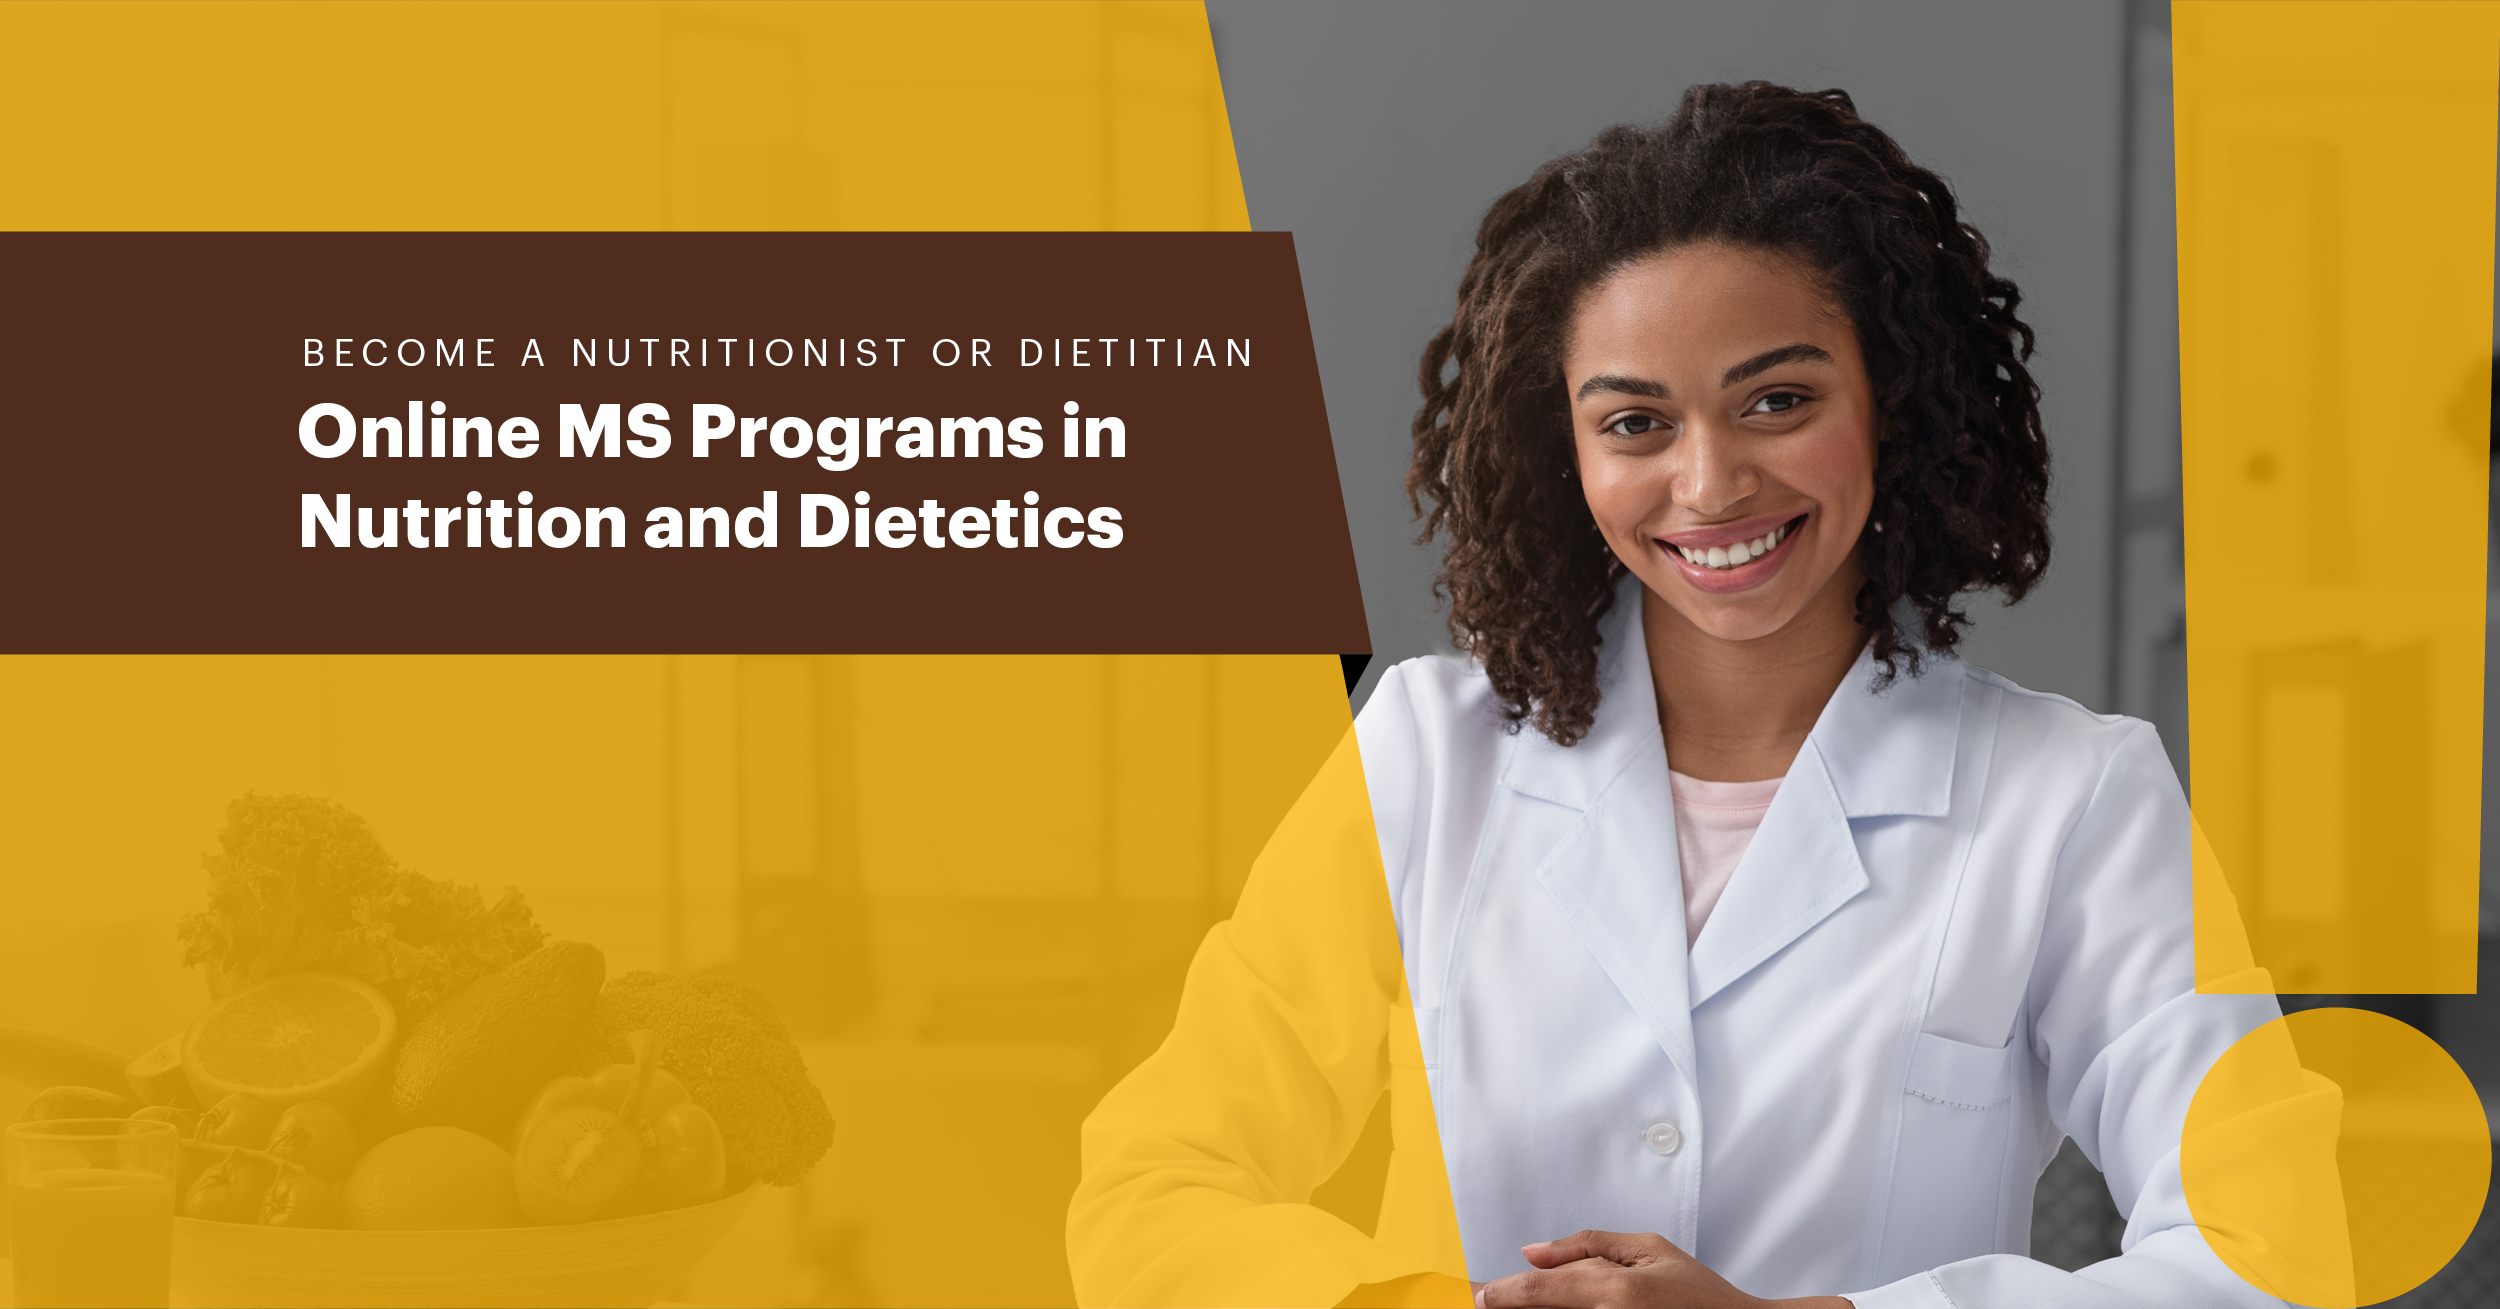 Become a Nutritionist or Dietitian Online MS Programs in Nutrition and Dietetics